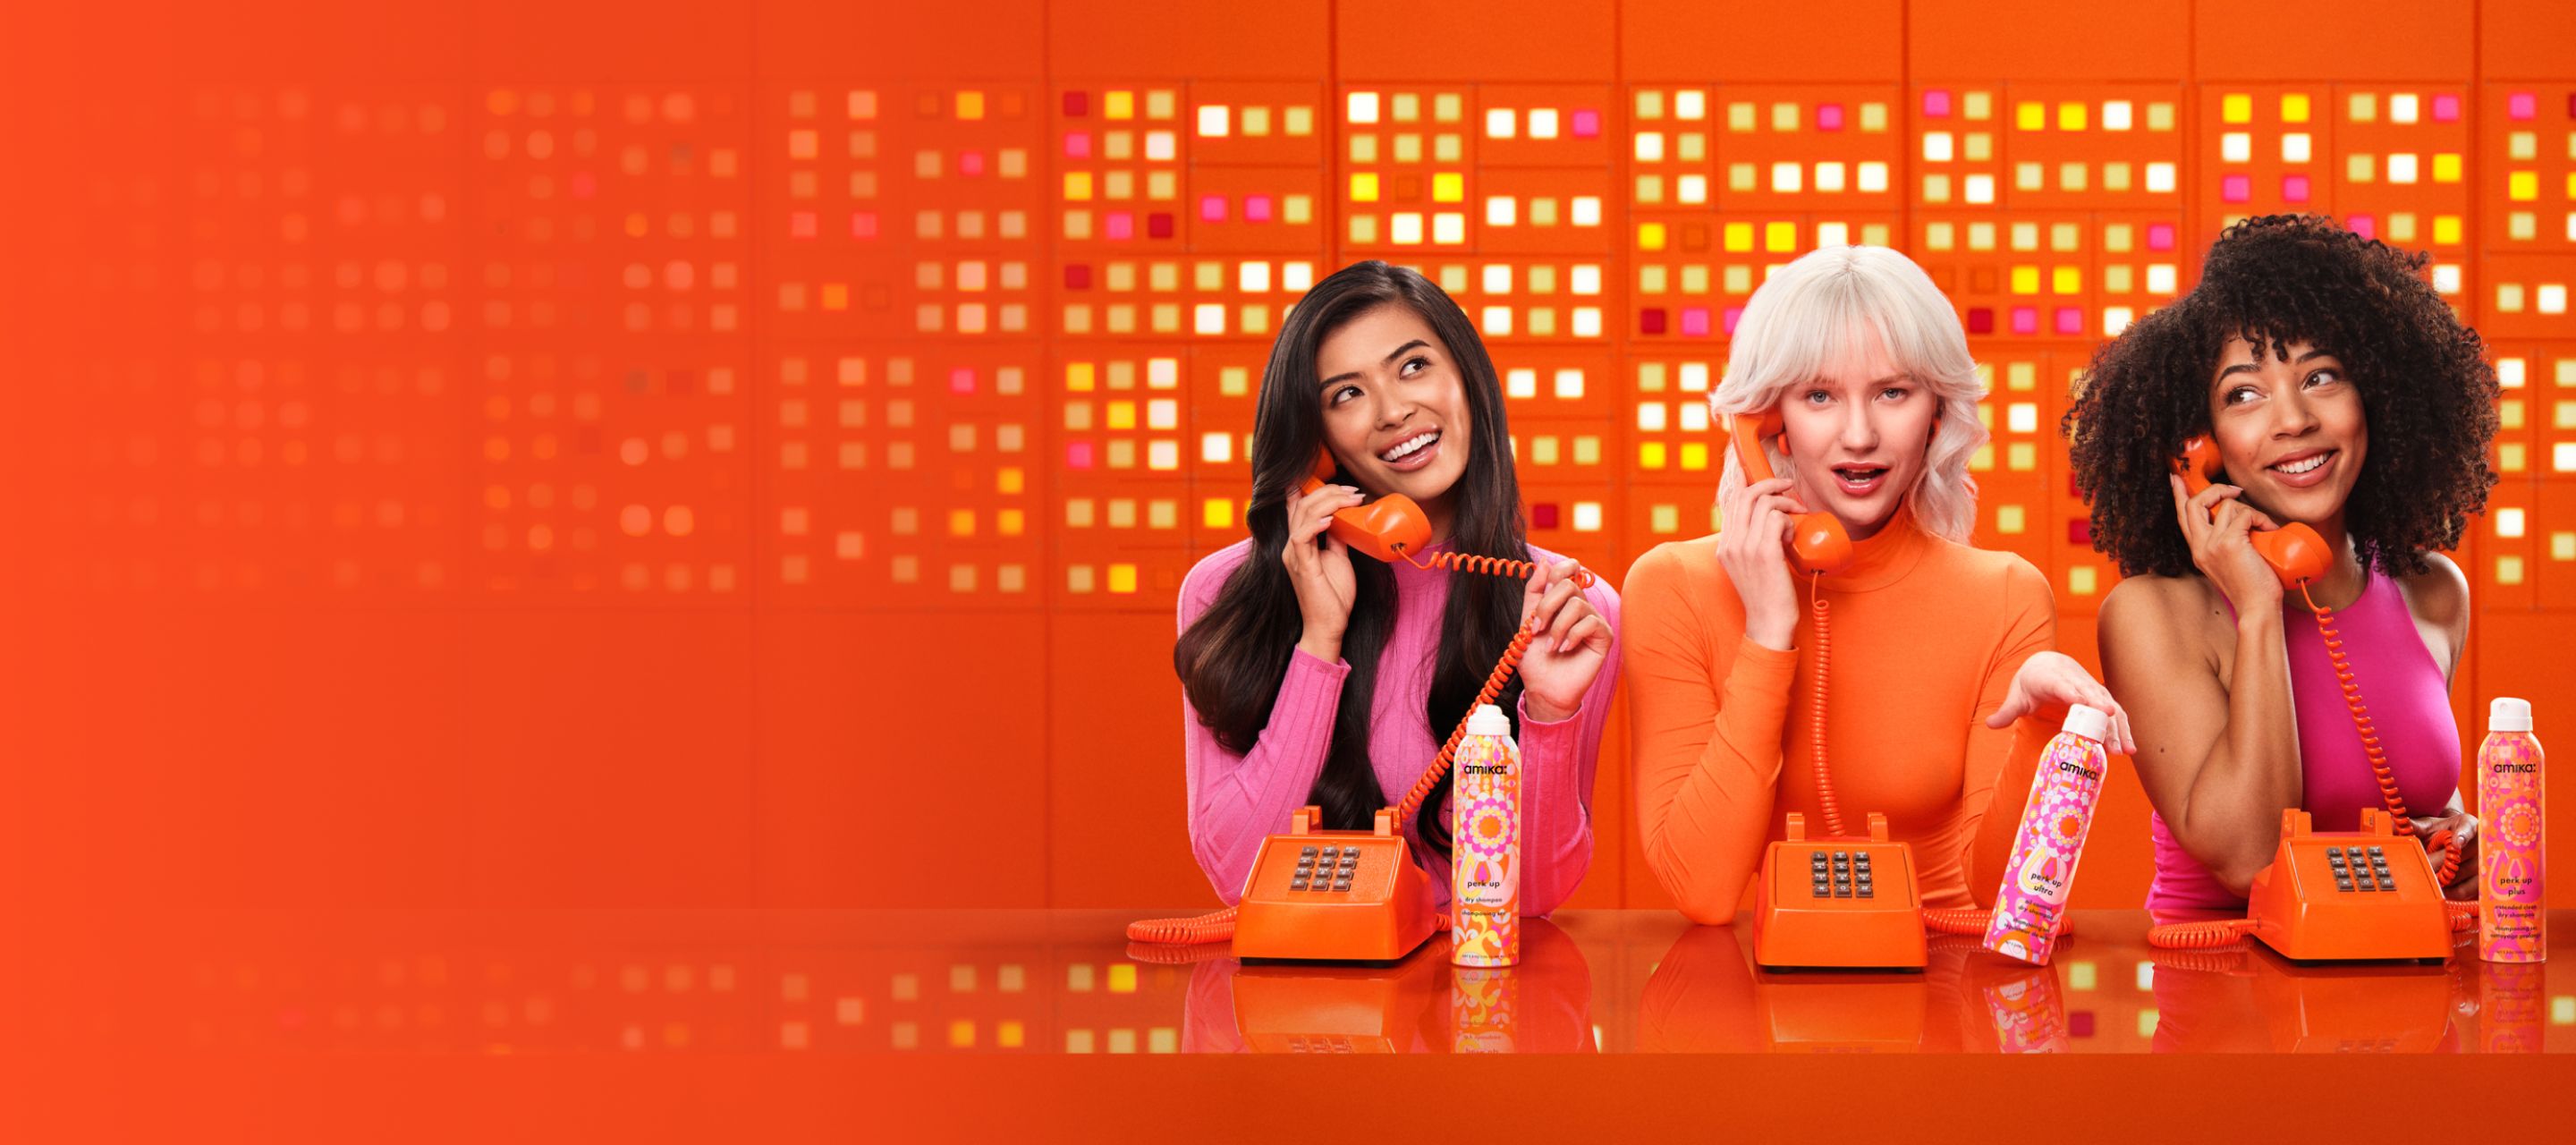 3 models talk on telephones and display amika perk up talc-free dry shampoo, perk up ultra oil control dry shampoo, and perk up plus extended clean dry shampoo.